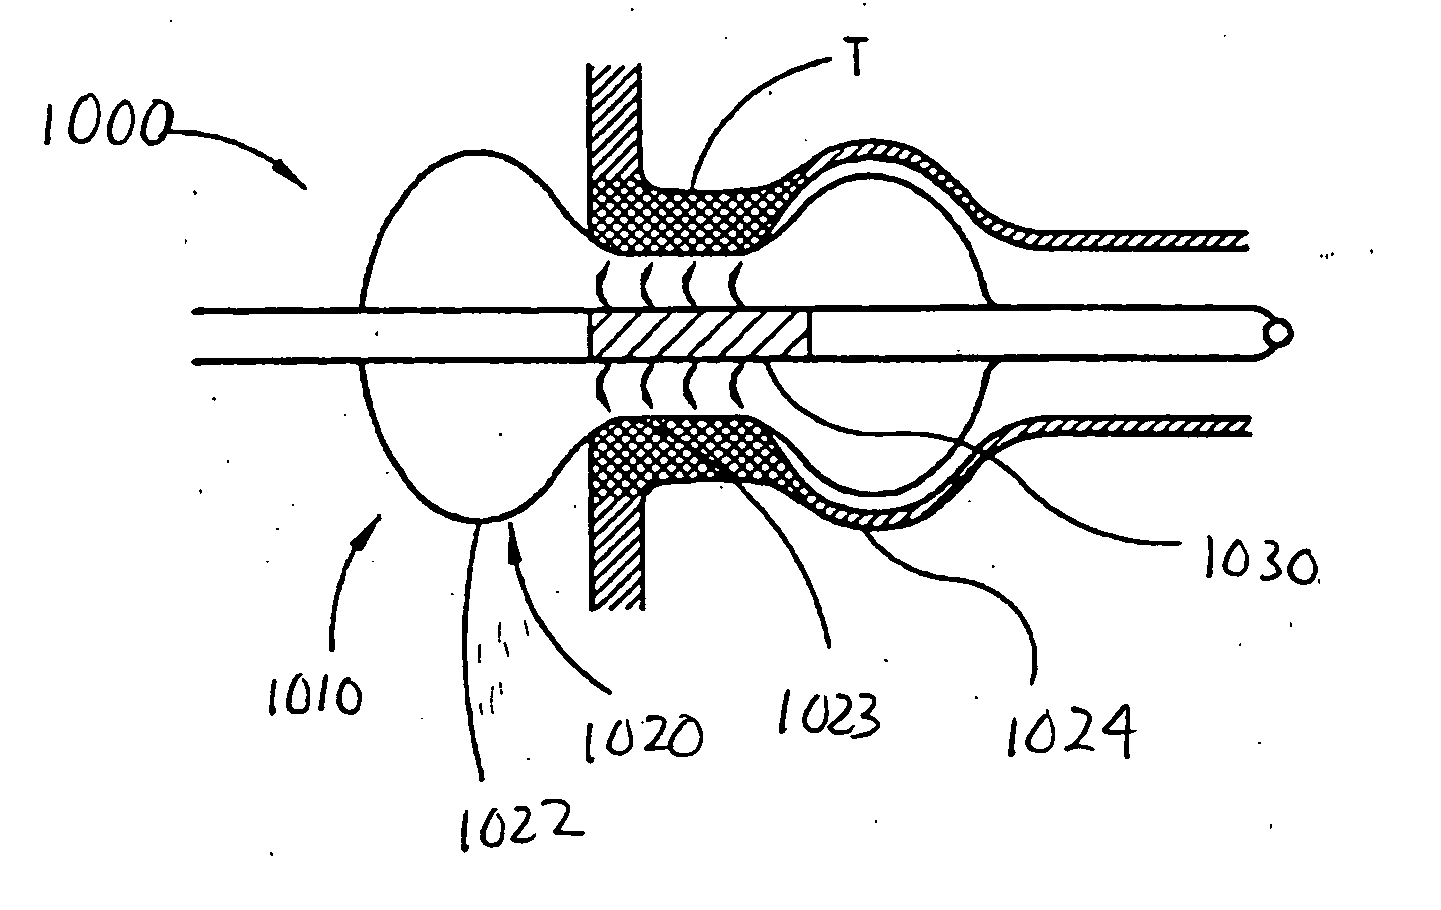 Circumferential ablation device assembly with an expandable member